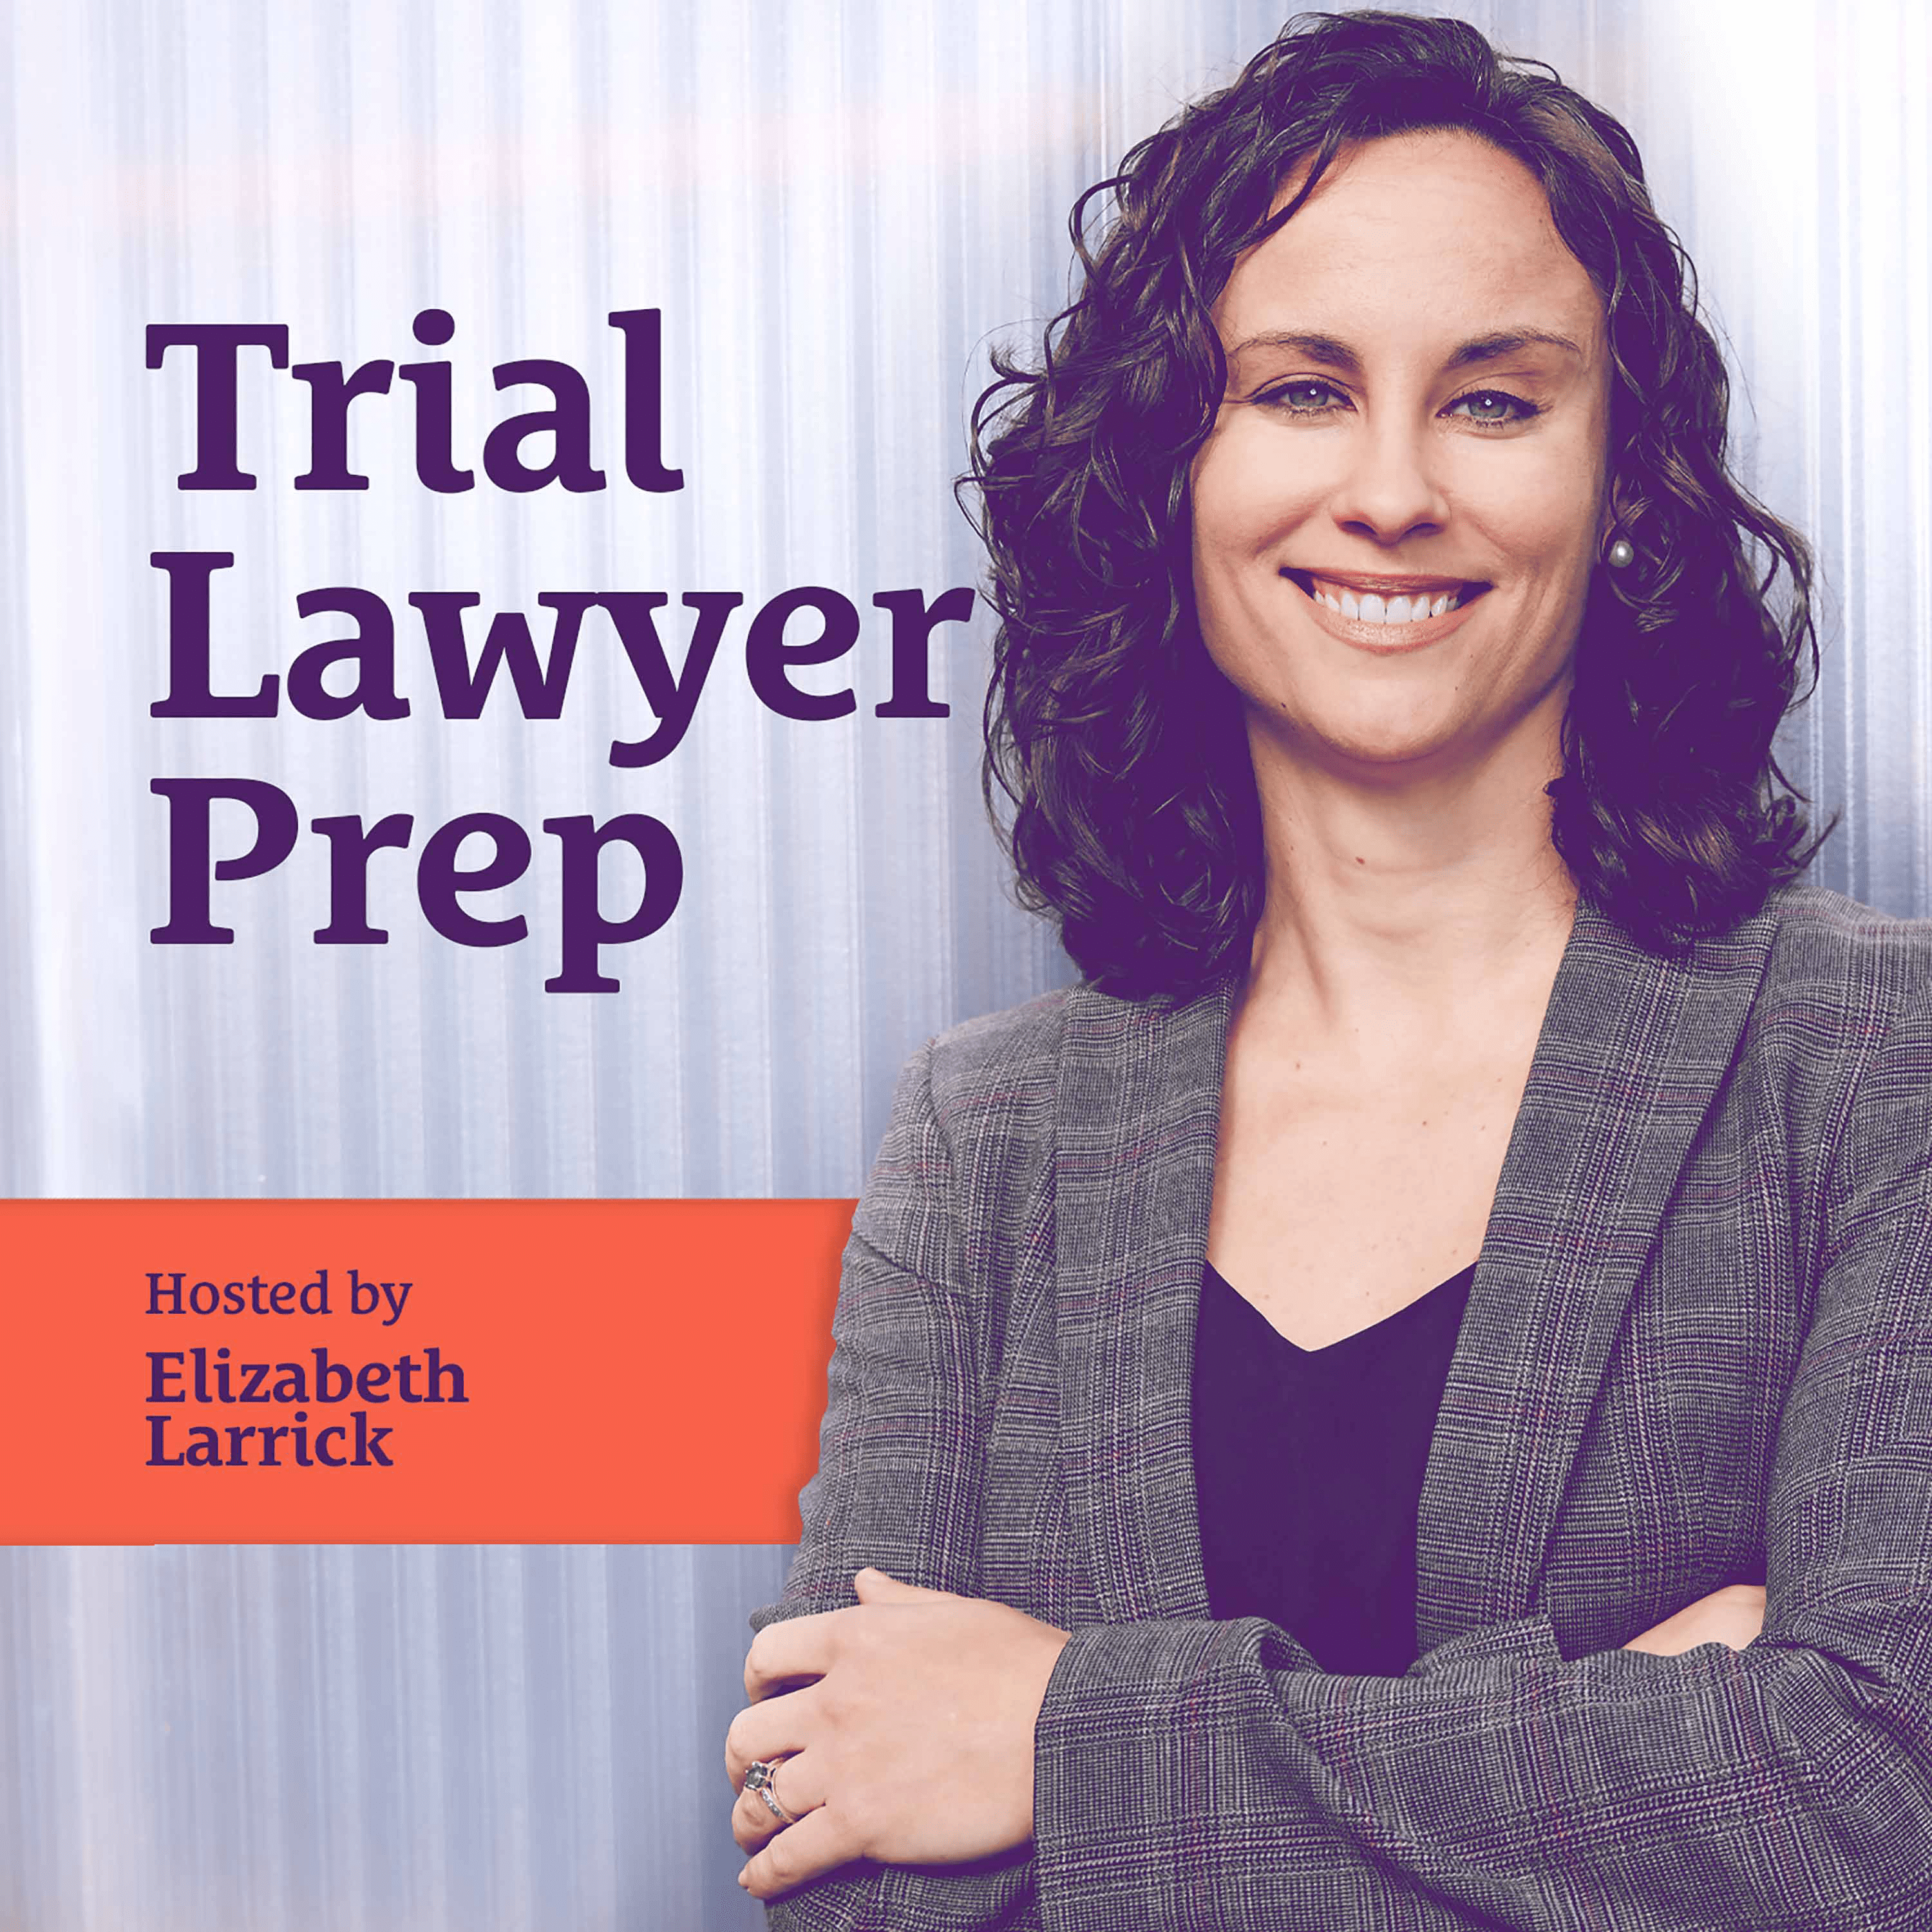 What Will You Learn on Trial Lawyer Prep?